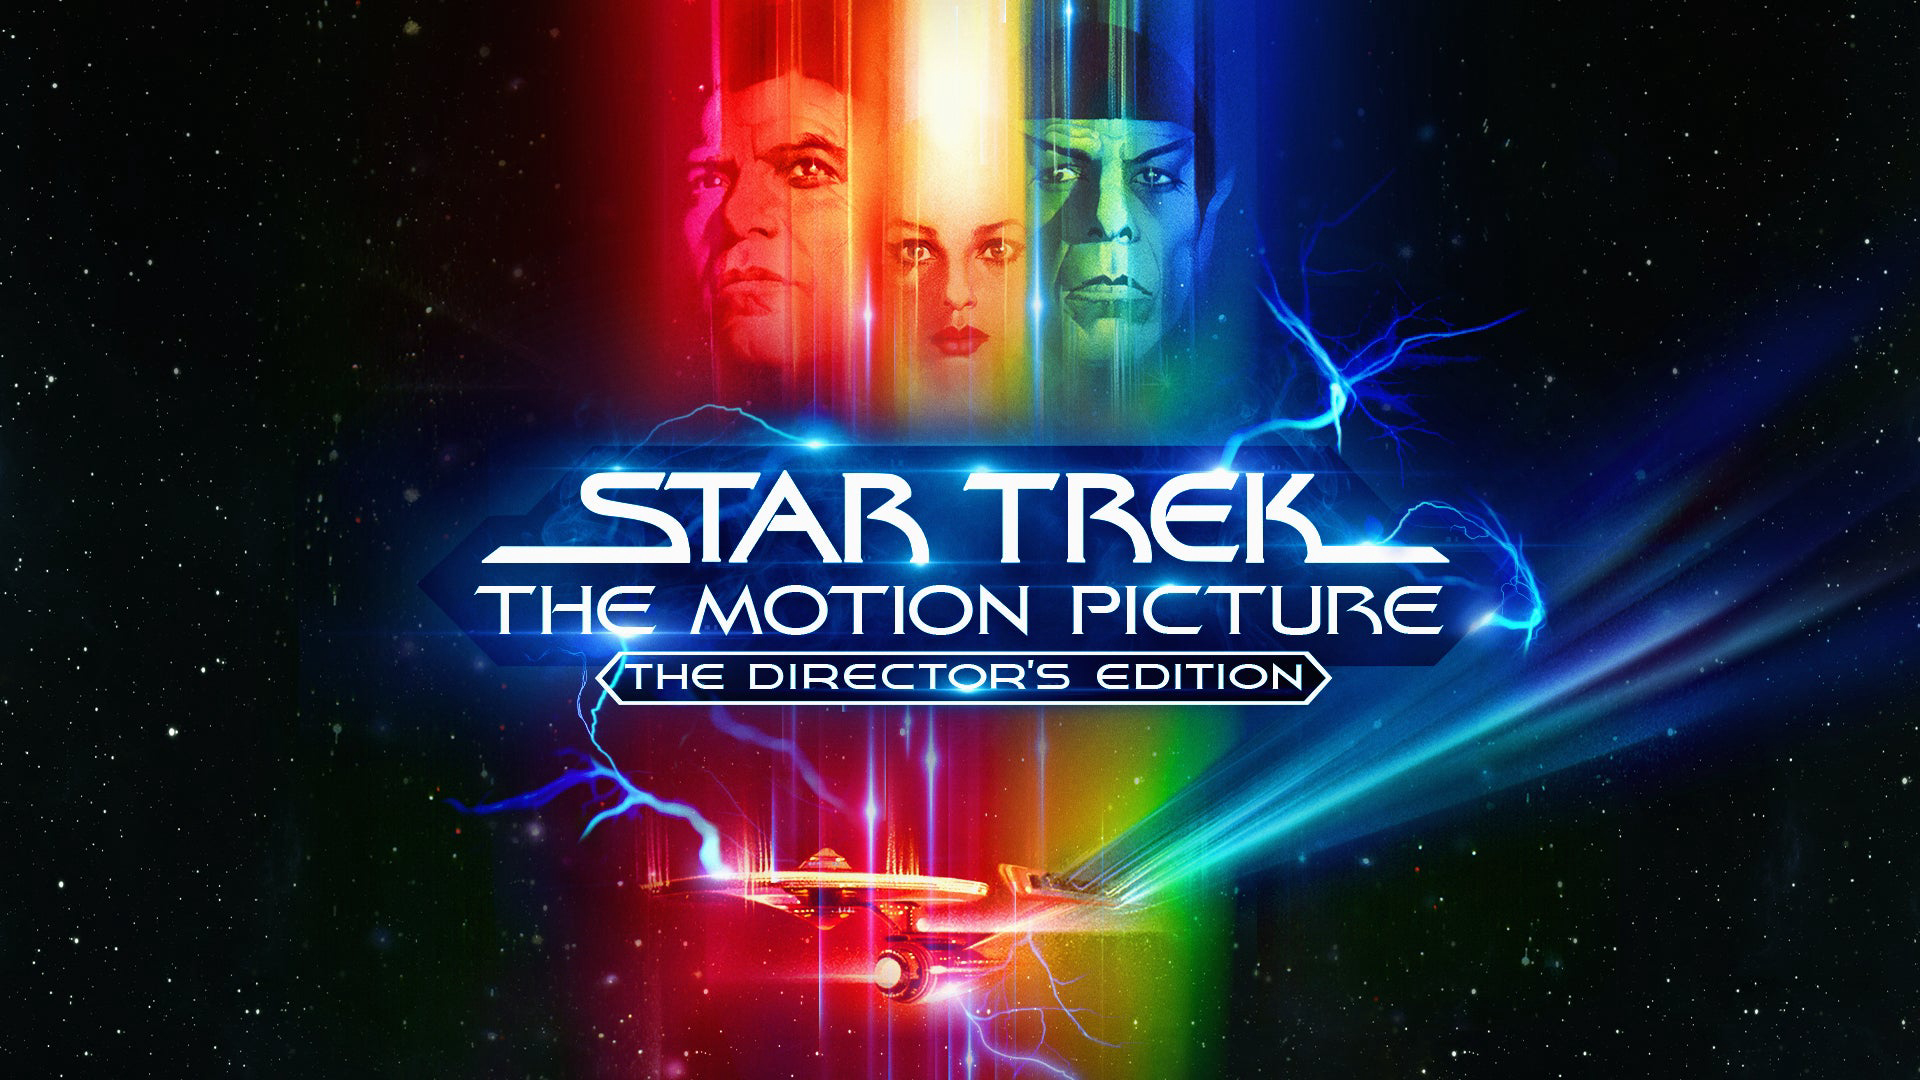 Star Trek: The Motion Picture / Star Trek: The Motion Picture (1979)